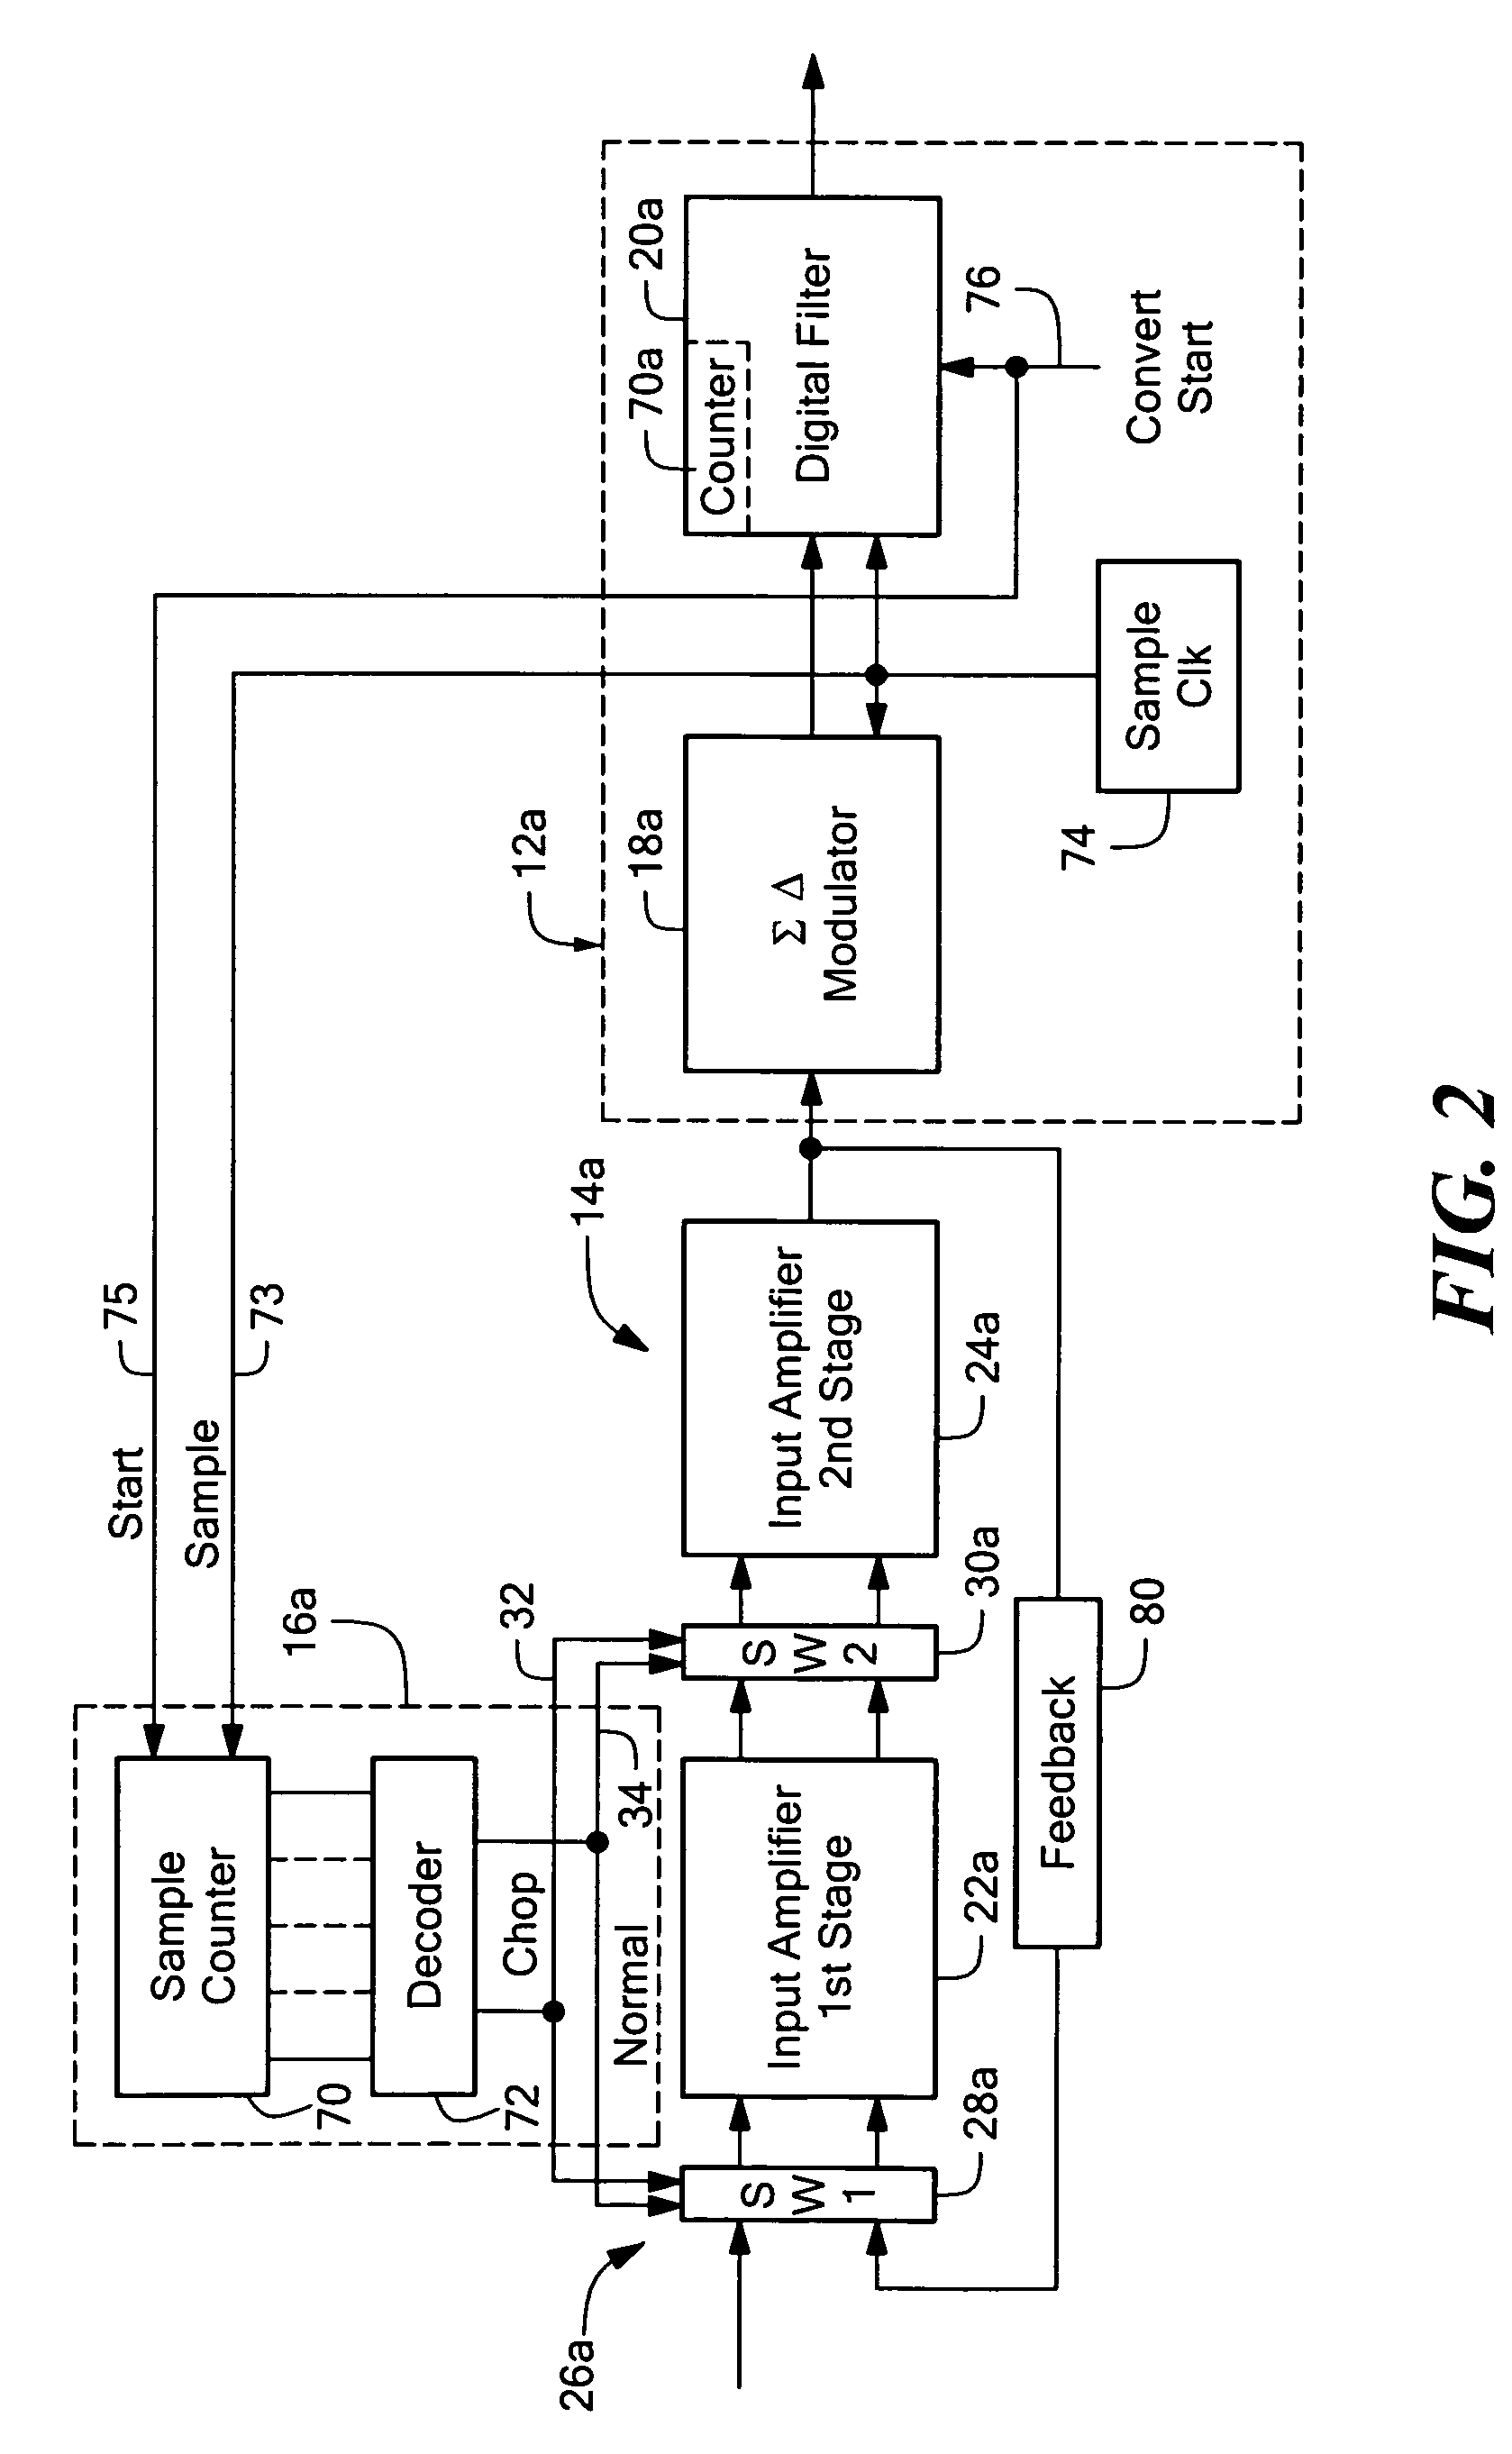 Reduced chop rate analog to digital converter system and method